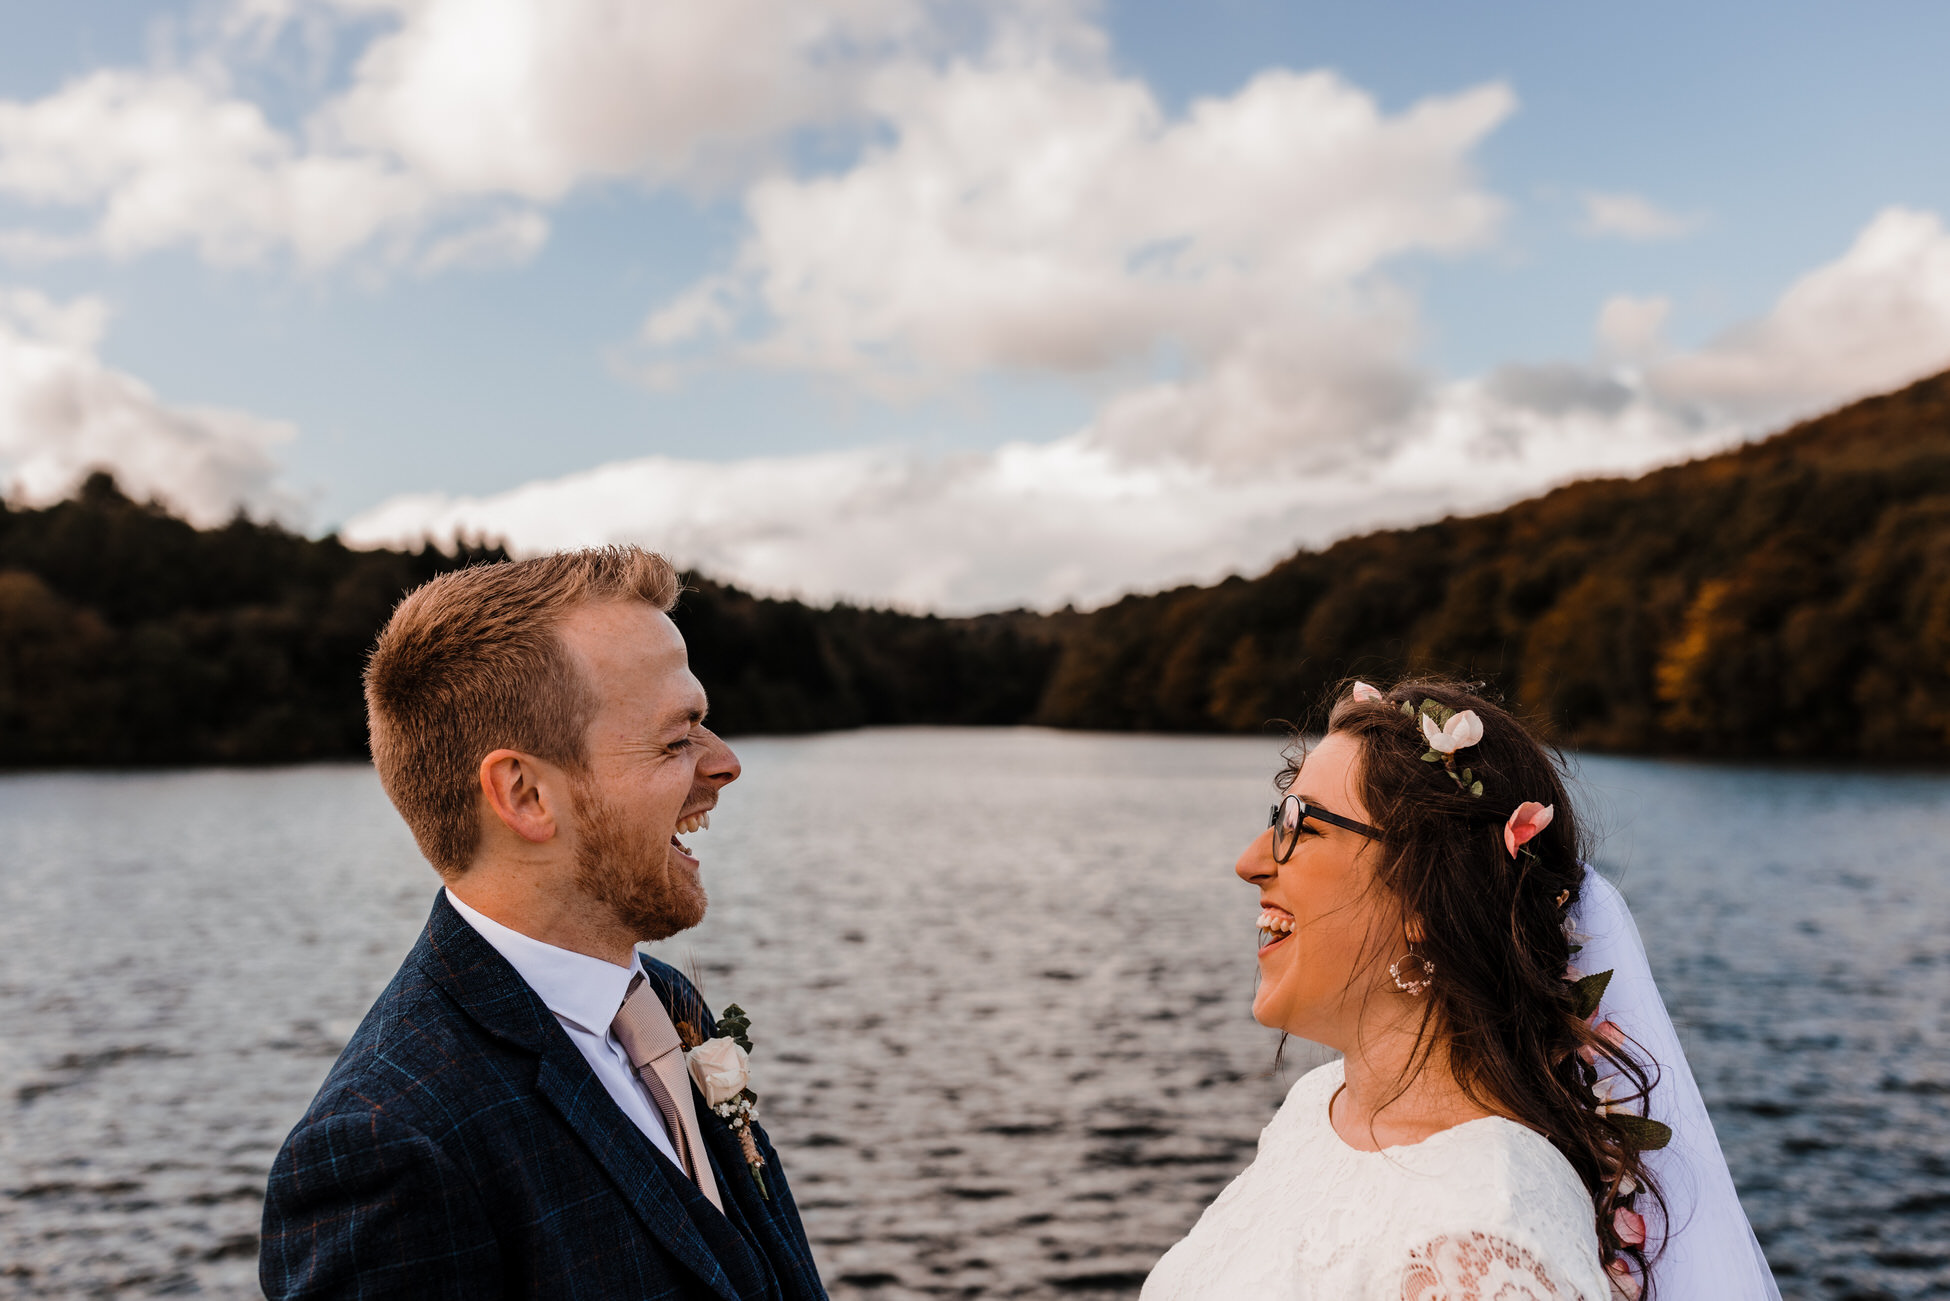 Owen and Emily look super happy in this relaxed photo from their wedding day, taken by a reservoir or lake. By Tom Hodgson Photography